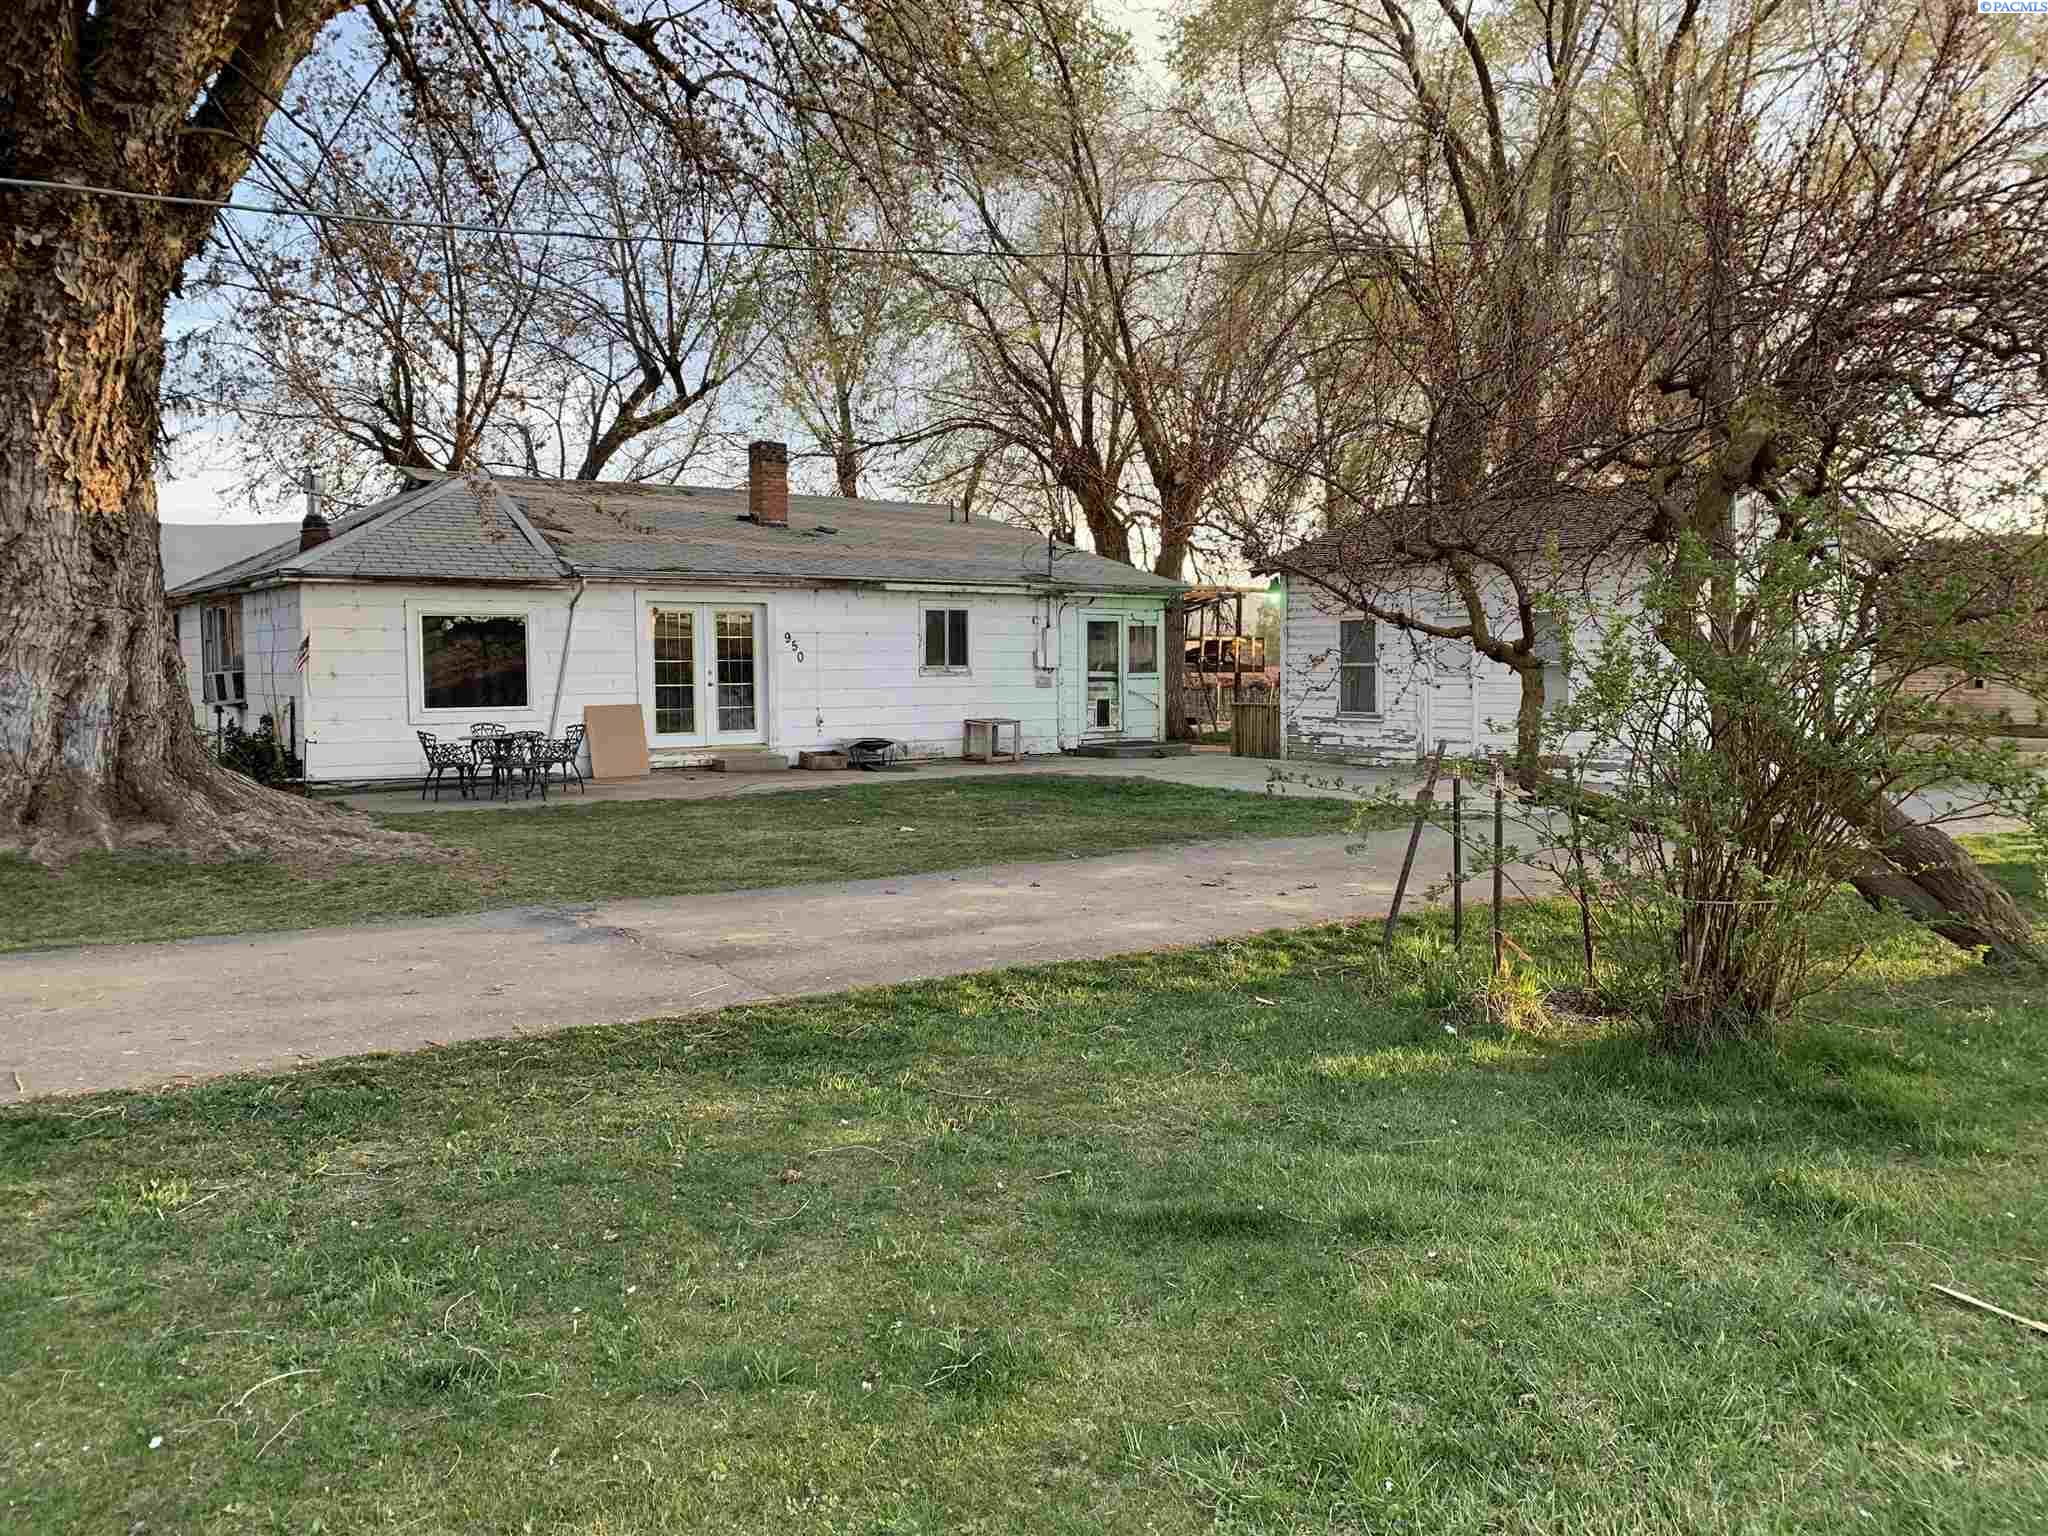 Prosser, WA Homes for Sale 300K - 400K: Listing Report | Tri-Cities